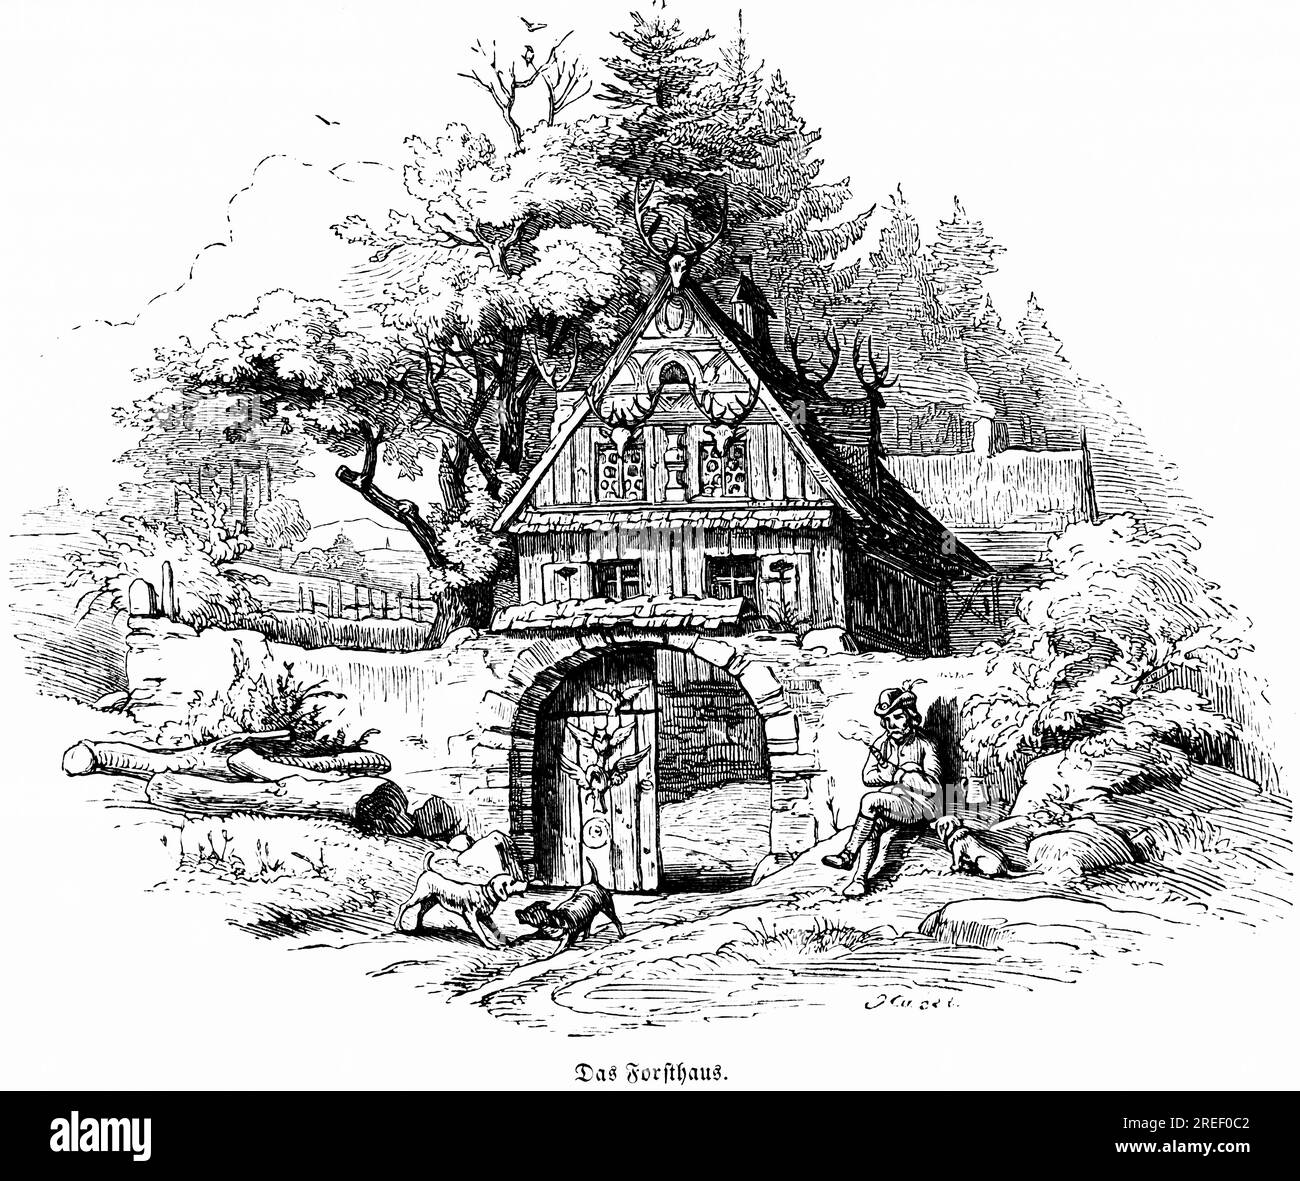 Forester's house, Hubertus hunting and hunting scenes, wild animals, old, wood, gable end, antlers, decoration, gate, driveway, forest, dogs Stock Photo